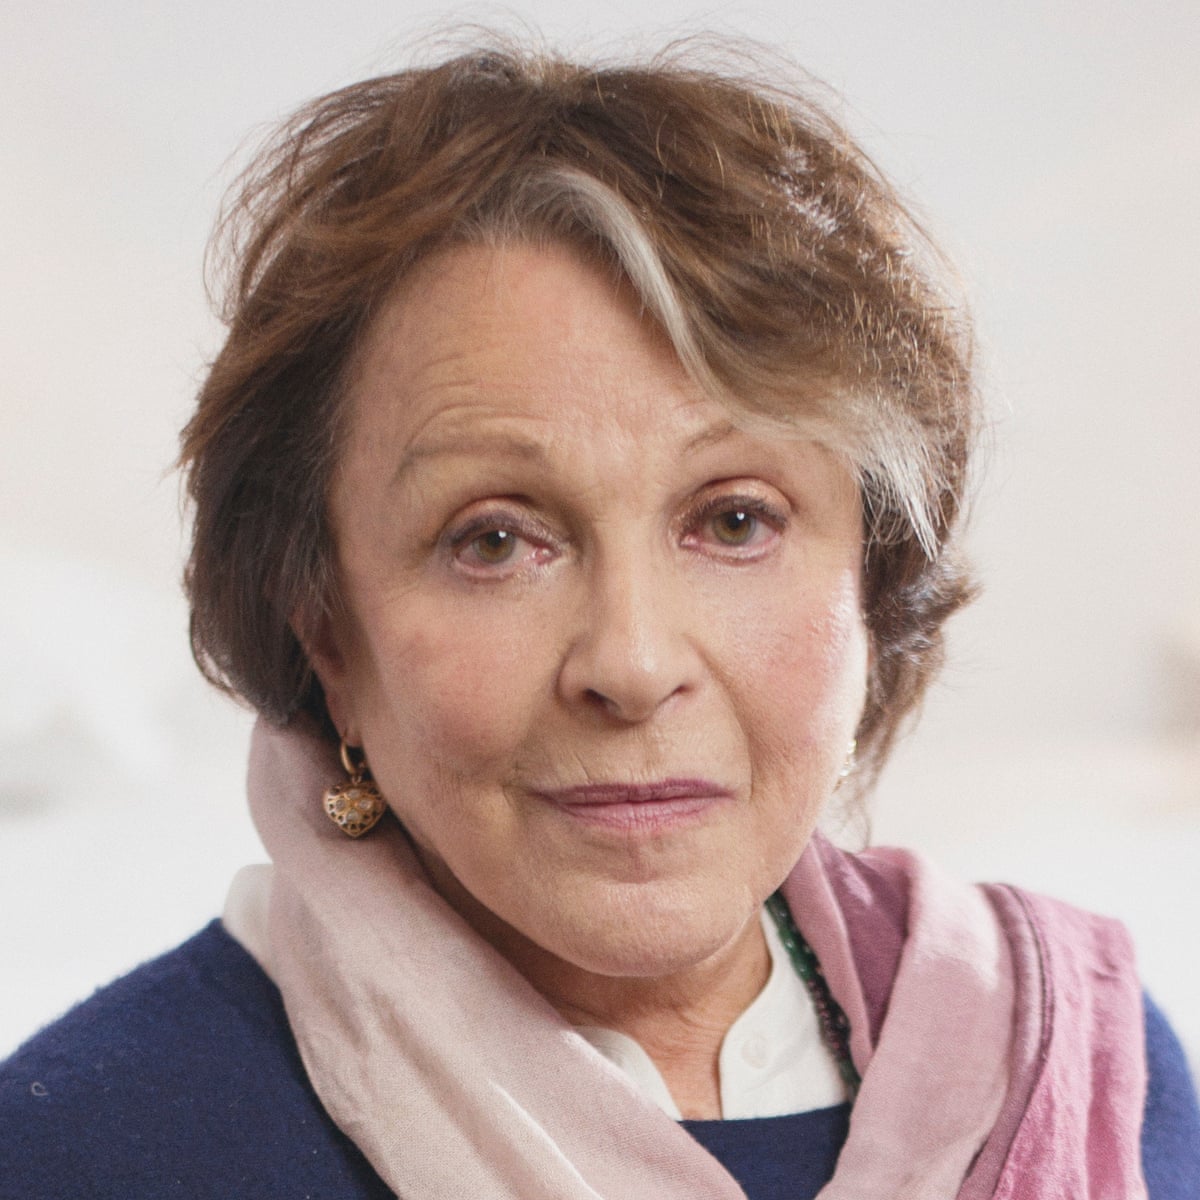 Claire Bloom at 90: a phenomenal actor with poise, spirit and steel |  Theatre | The Guardian